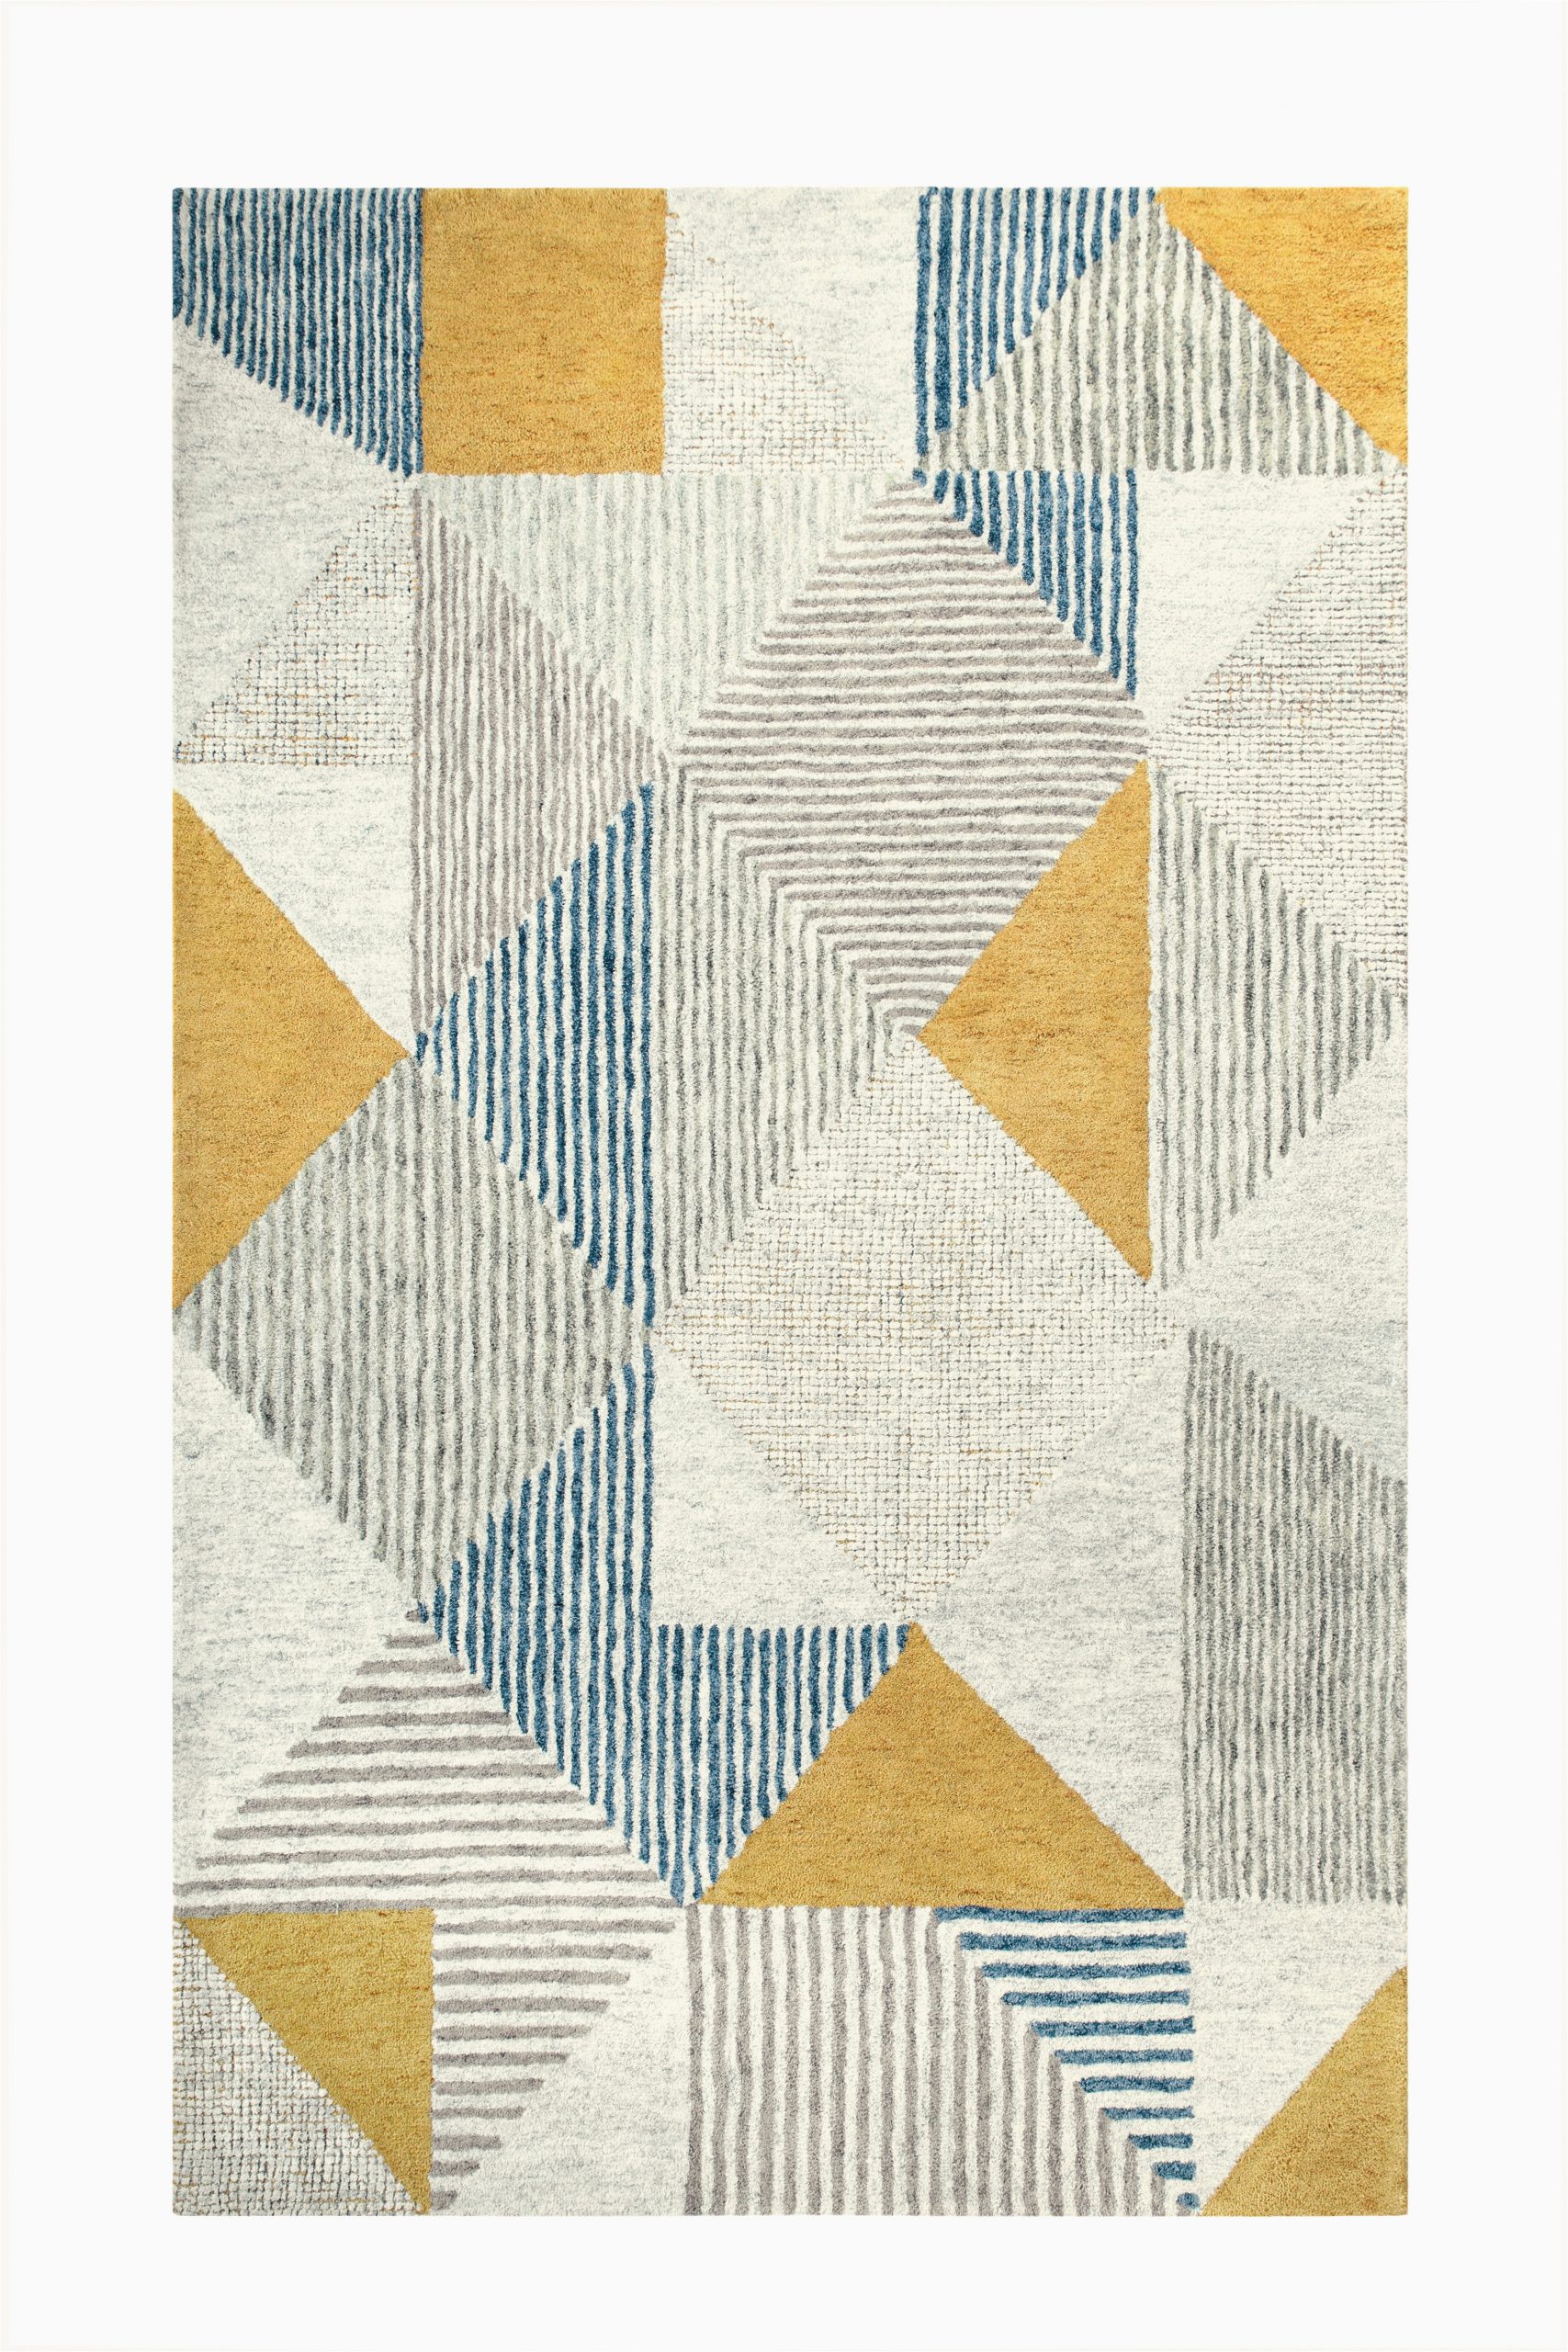 Grey Yellow White area Rug Griffin Geometric Handmade Tufted Wool Blue Gray Yellow area Rug